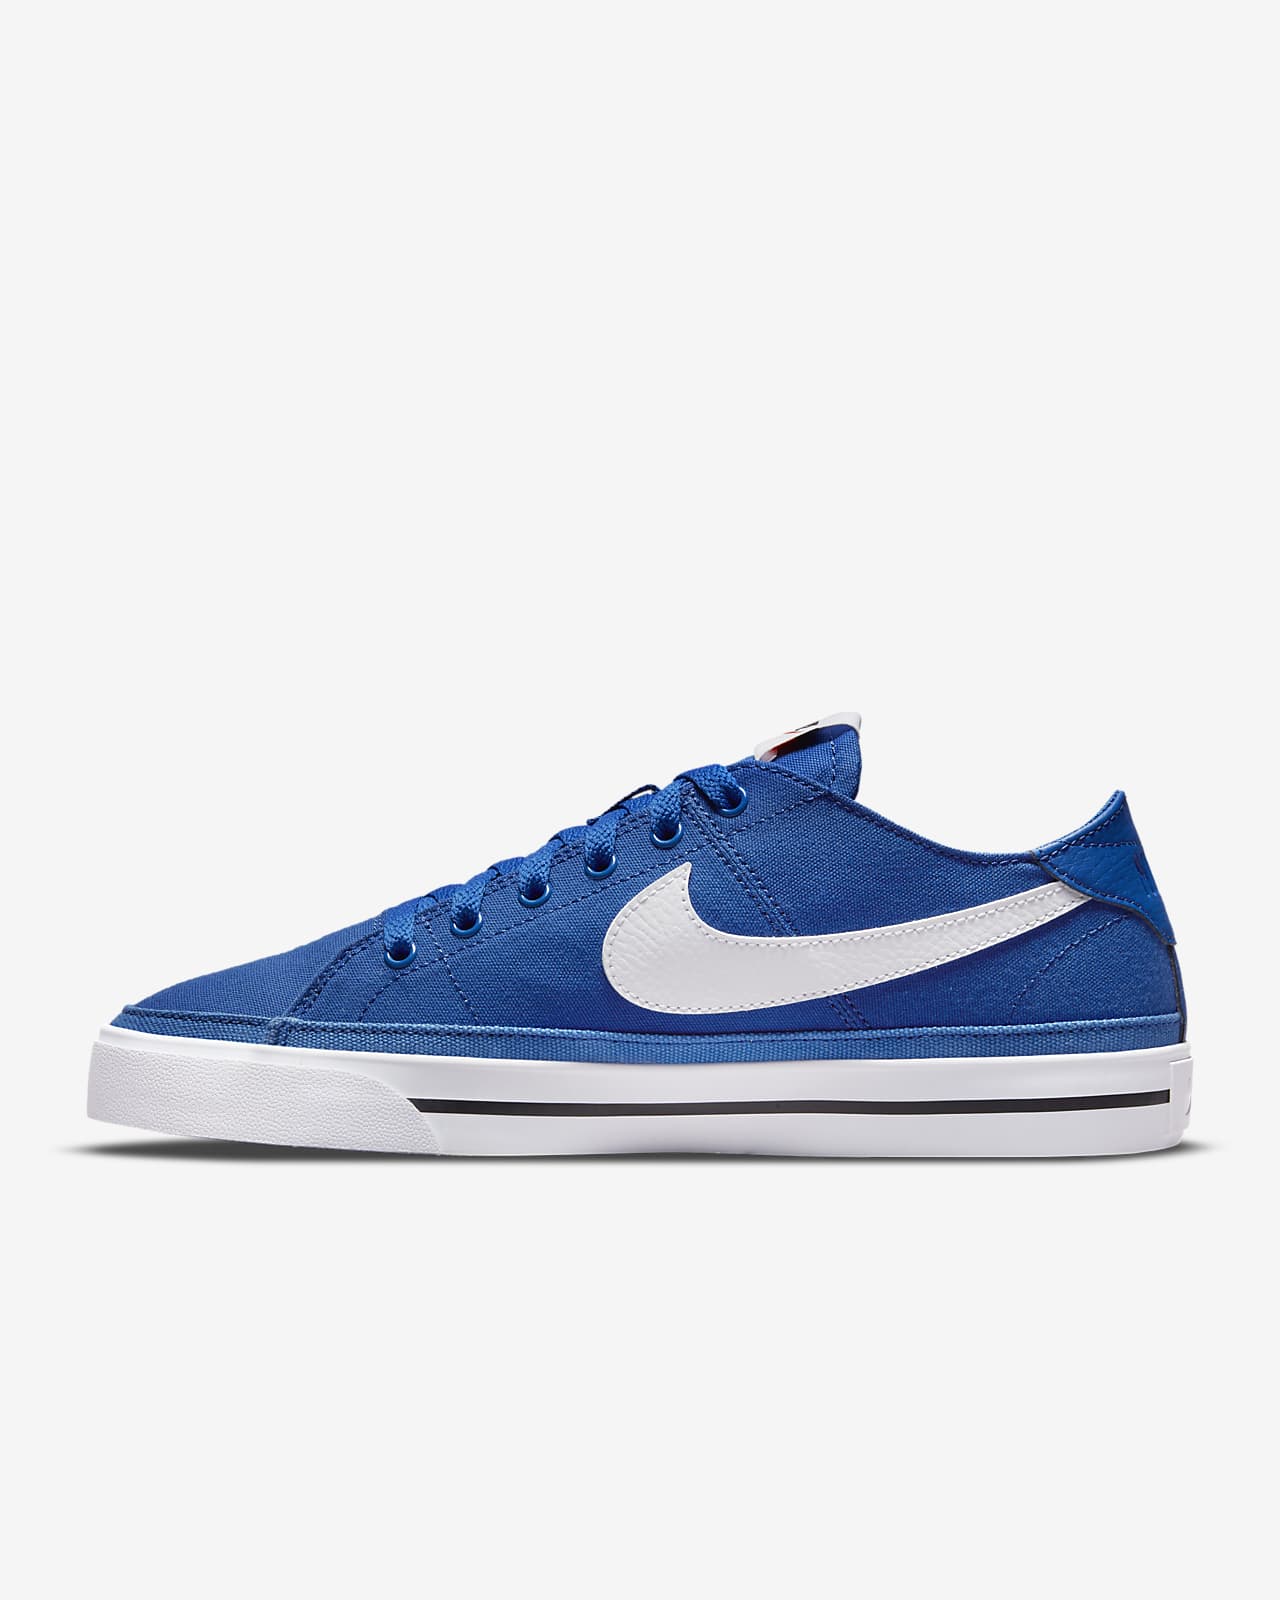 nike mens shoes black and blue